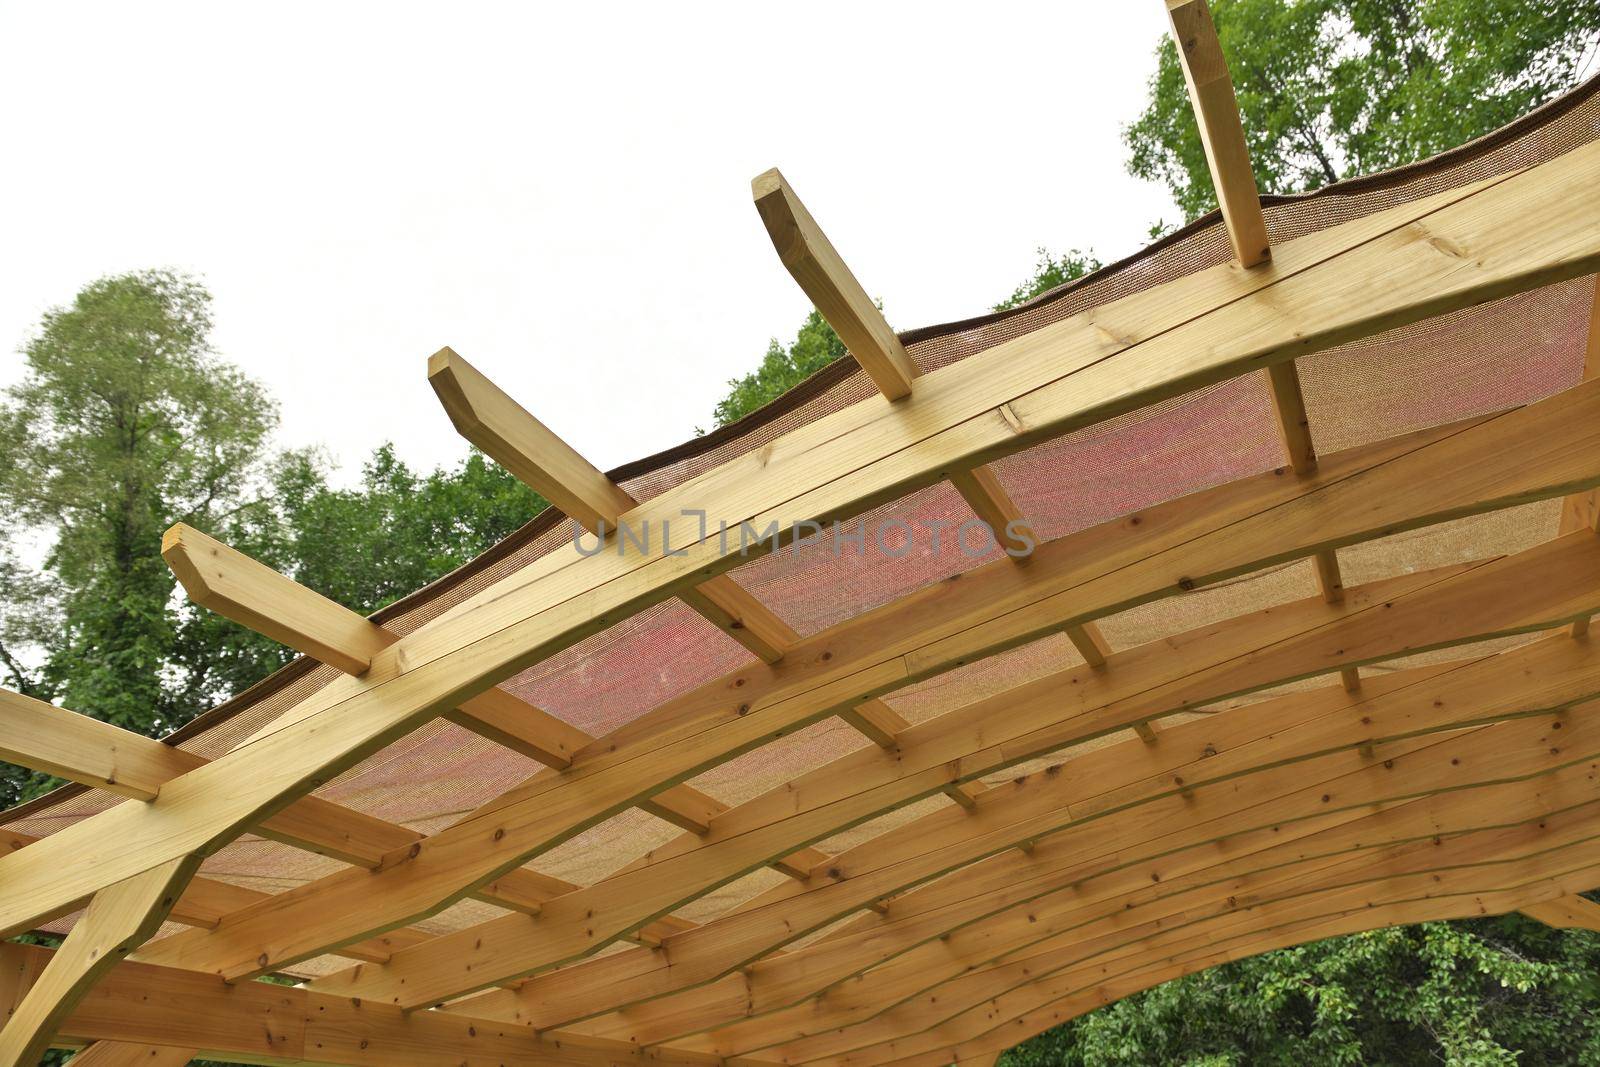 Underside of a Finely Crafted Pergola Roof with Burlap or Canvas Covering to Provide Shade. High quality photo